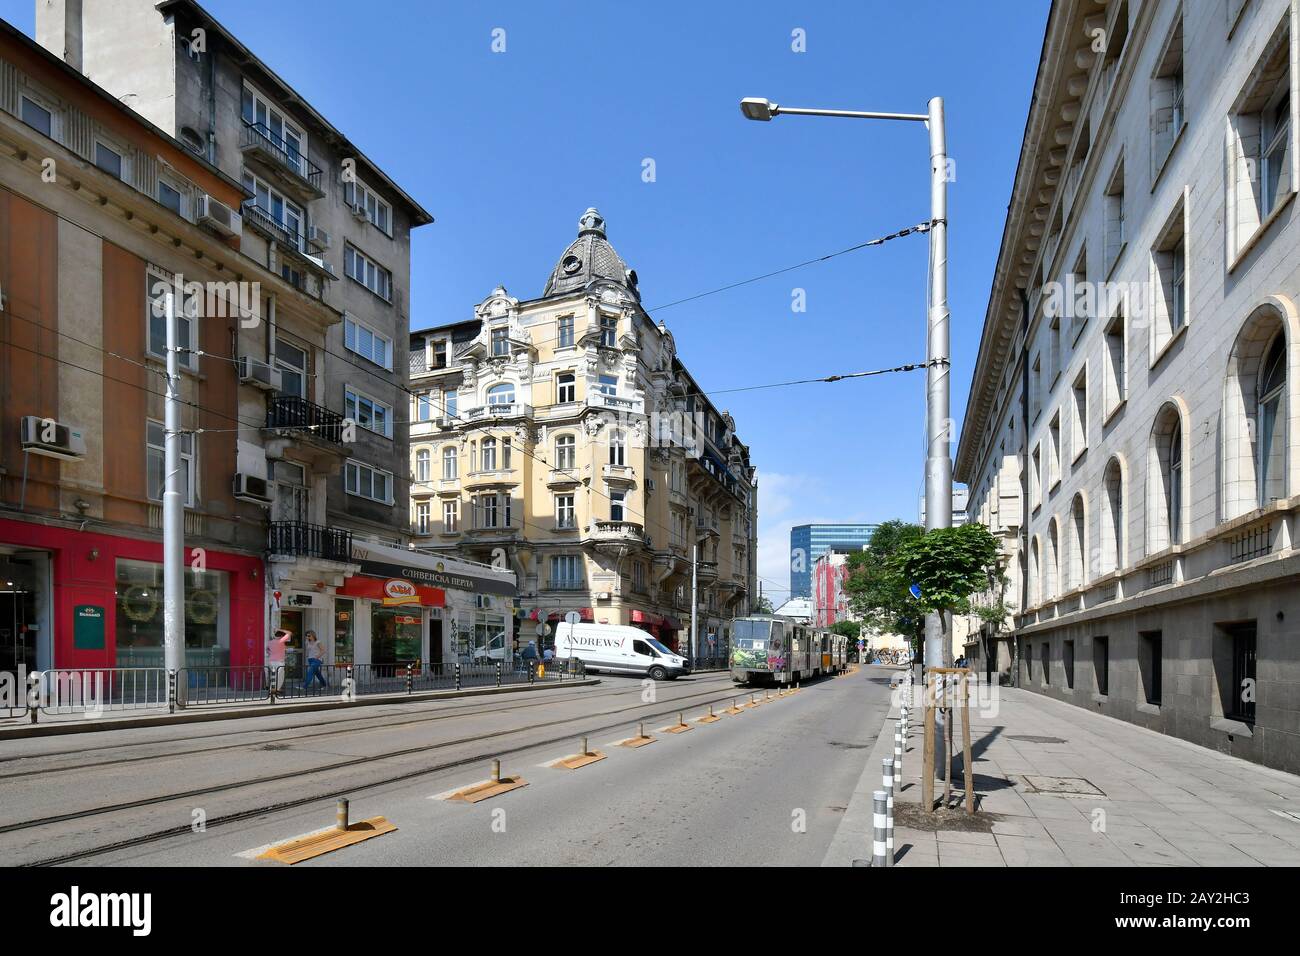 Sofia, Bulgaria - June 16, 2018: Unidentified people and public tram on street in the capital of Bulgaria Stock Photo